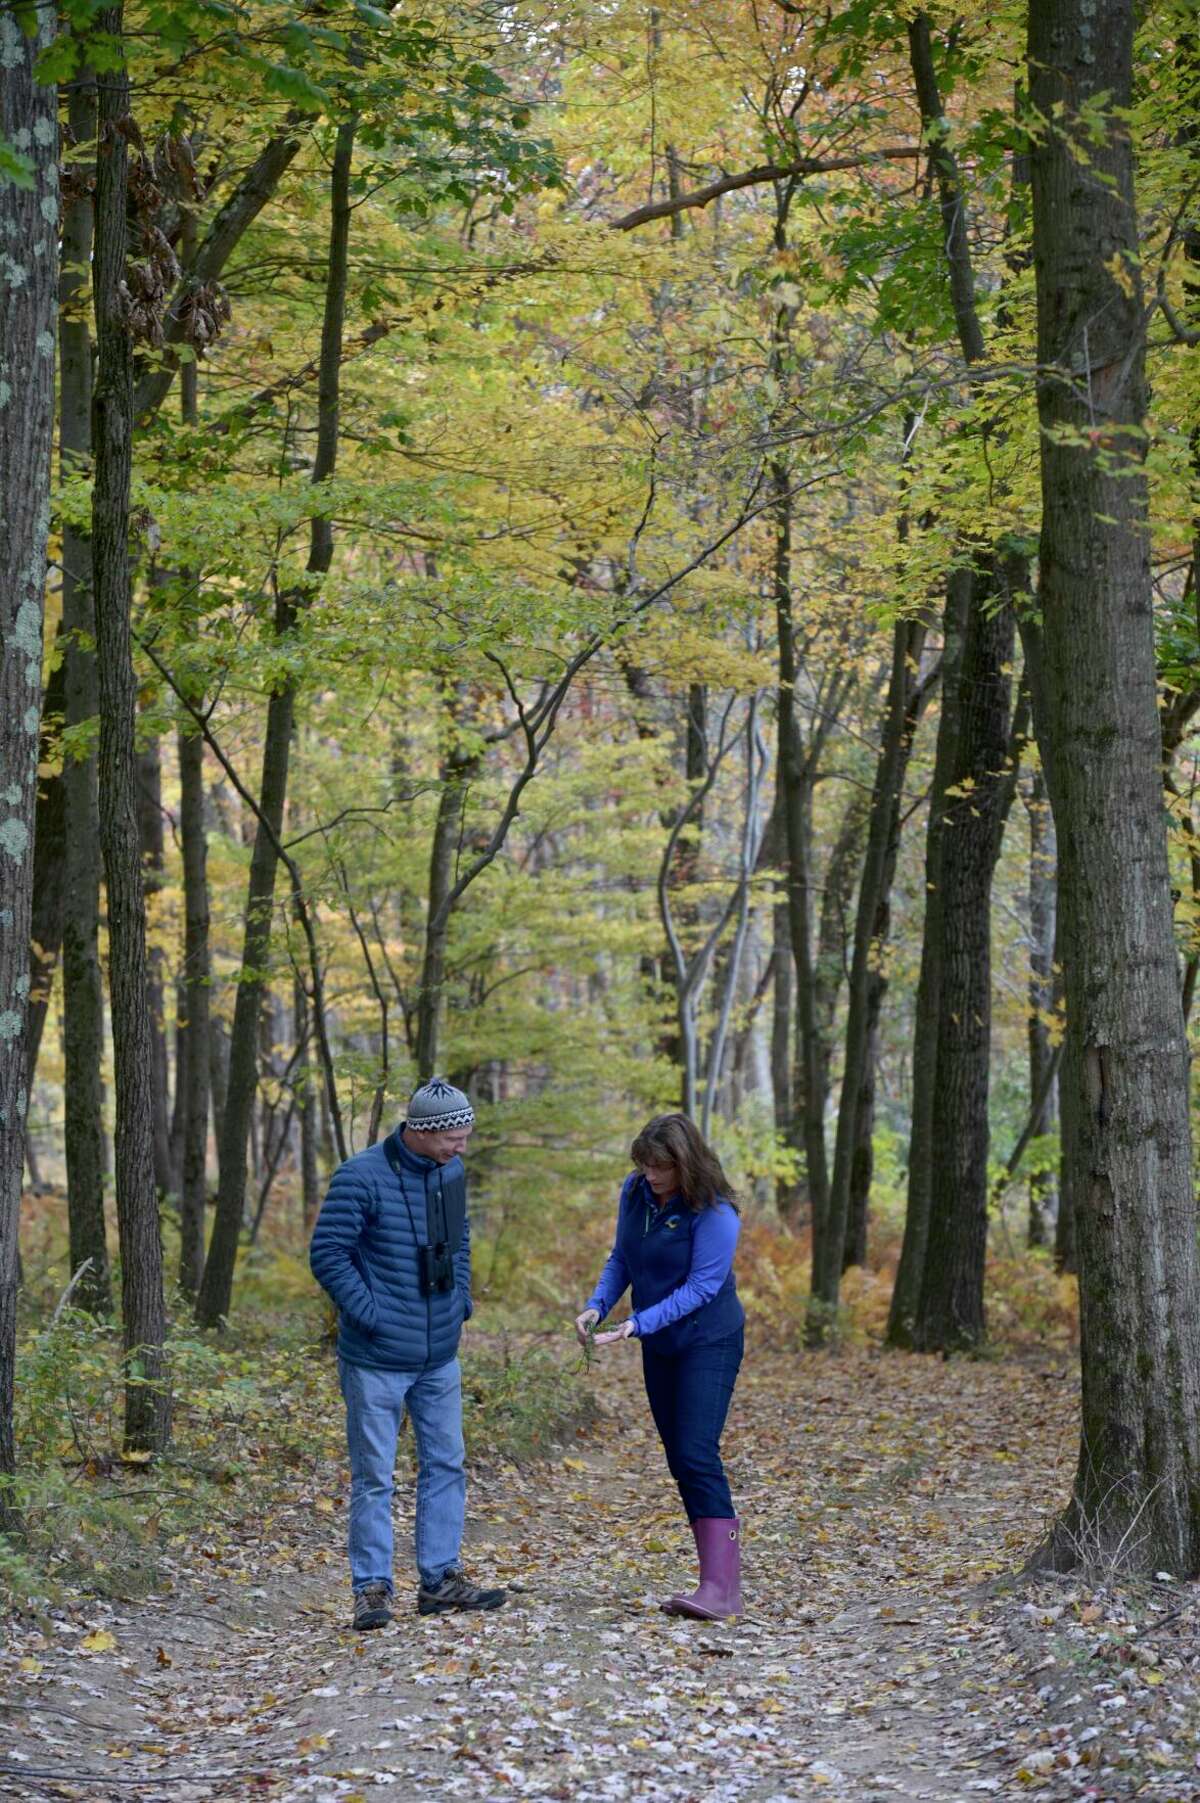 Deer Pond Farm director Cathy Hagadorn, right, and biologist Jim Arrigoni on one of the trails at Deer Pond Farm in Sherman, Conn., in October 2019.